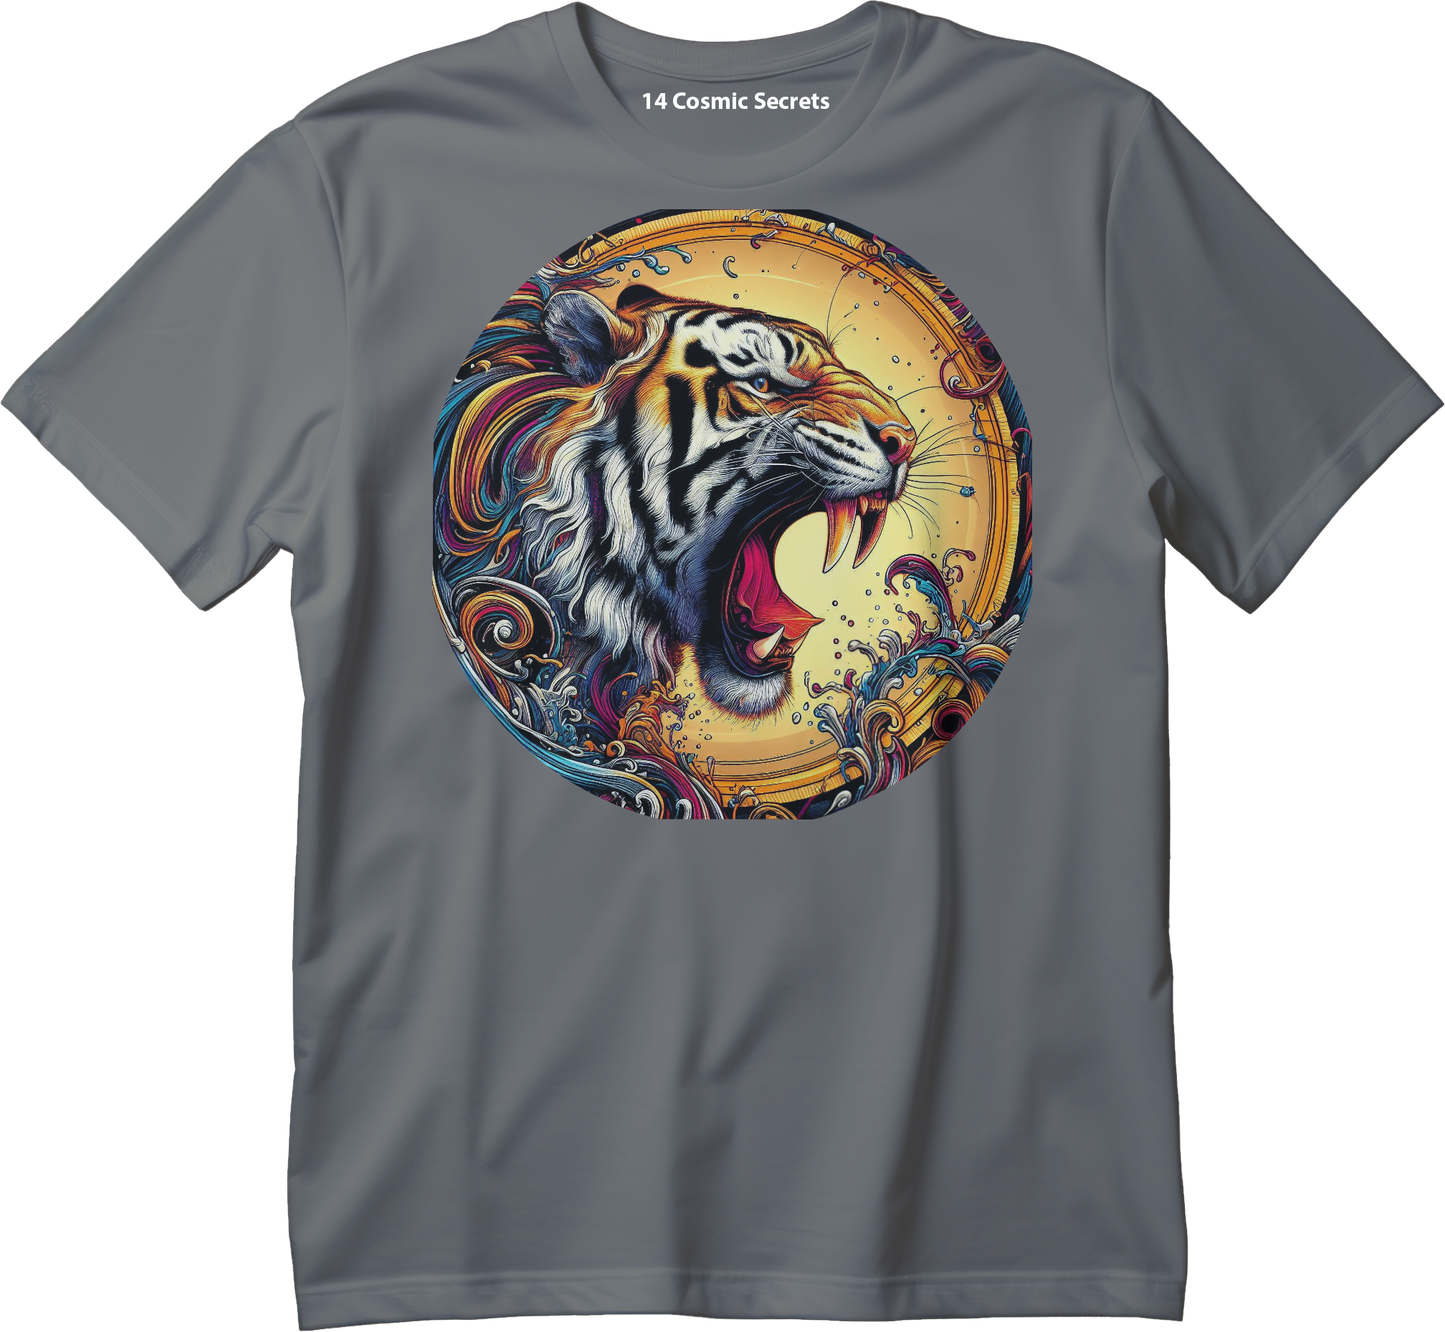 Tiger's Crowned Attire Graphic Printed T-Shirt  Cotton T-Shirt Magnificence of India T-Shirt